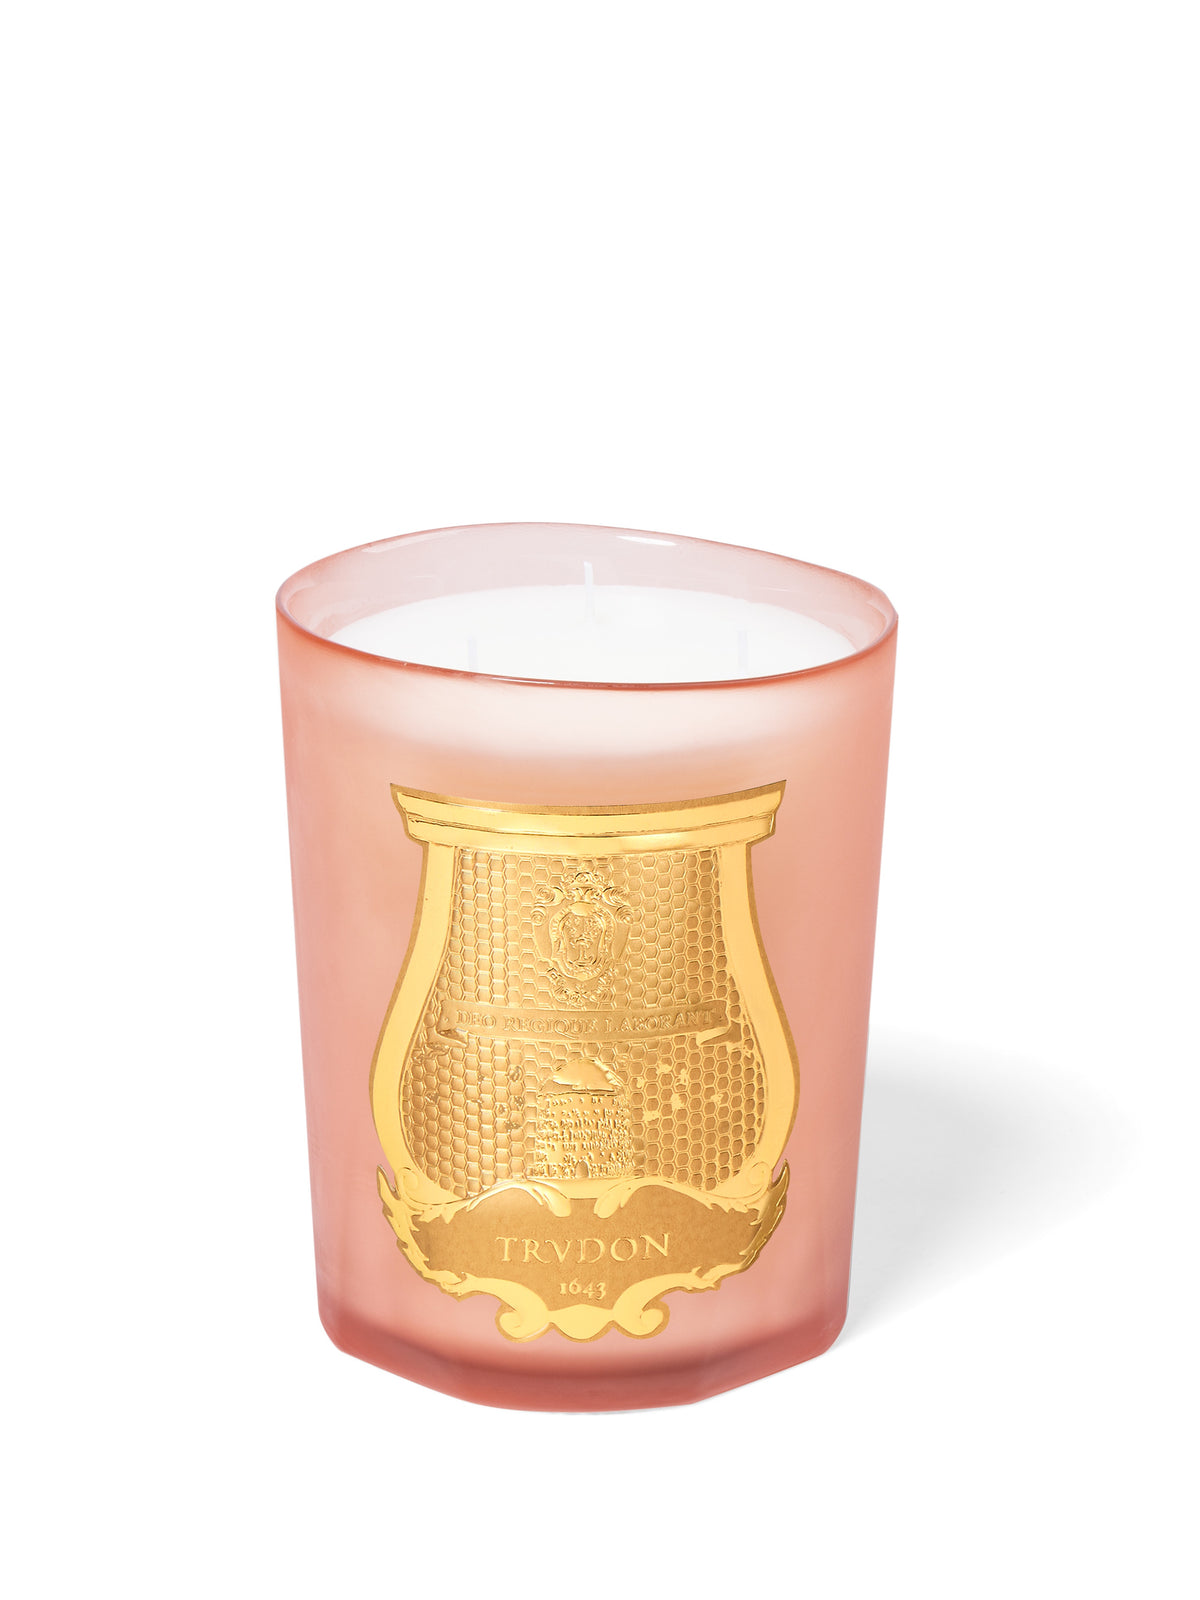 CIRE TRUDON CANDLE 800g TUILERIES — WORLD